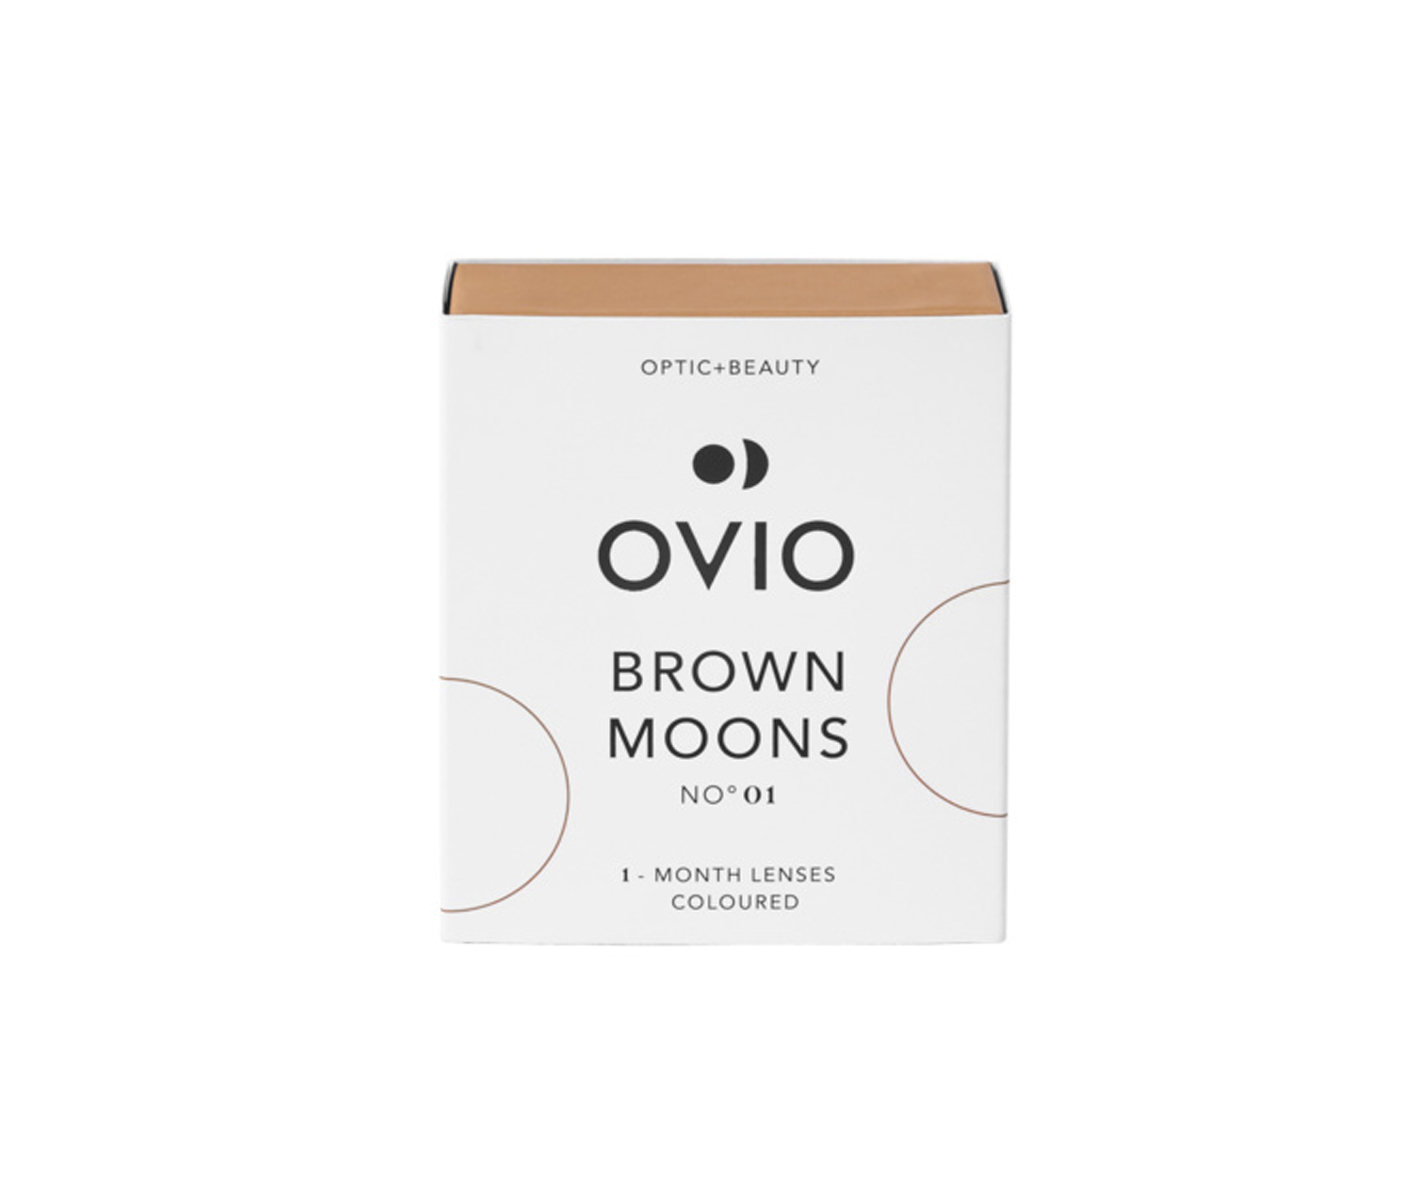  OVIO, Brown Moons NO.2, brown monthly lenses